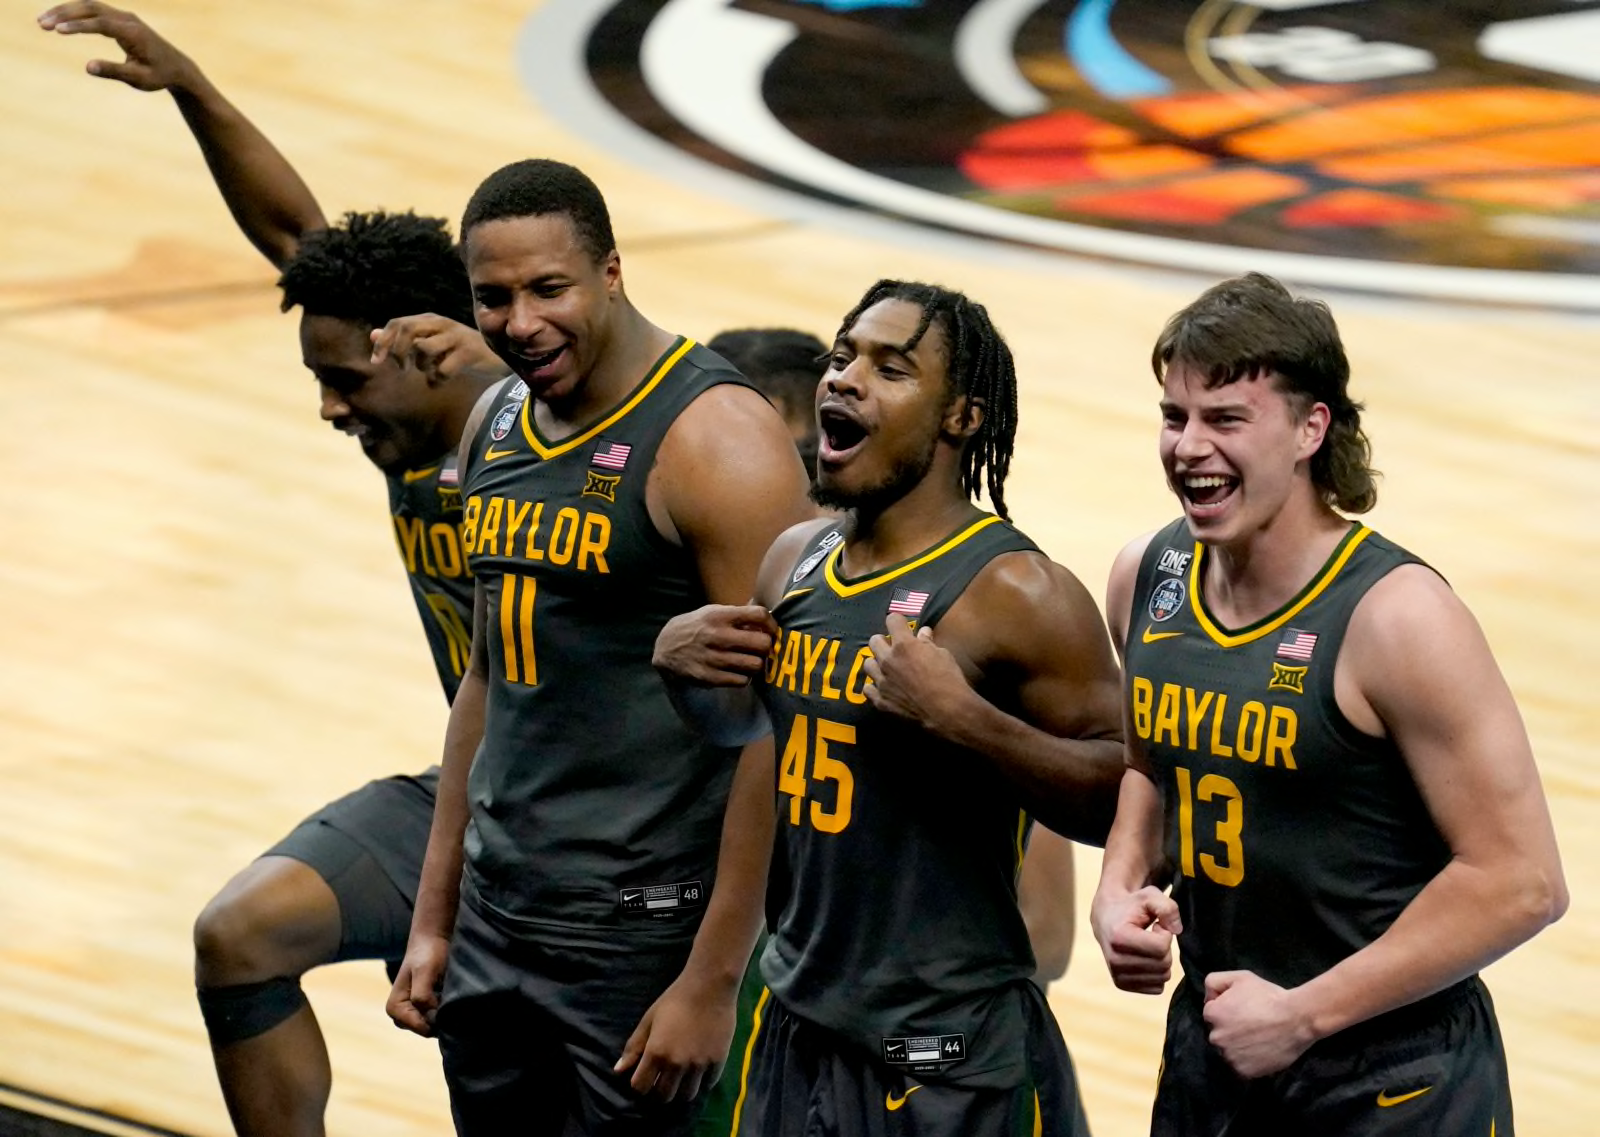 Baylor Basketball is in serious contention to be CBB's next blueblood